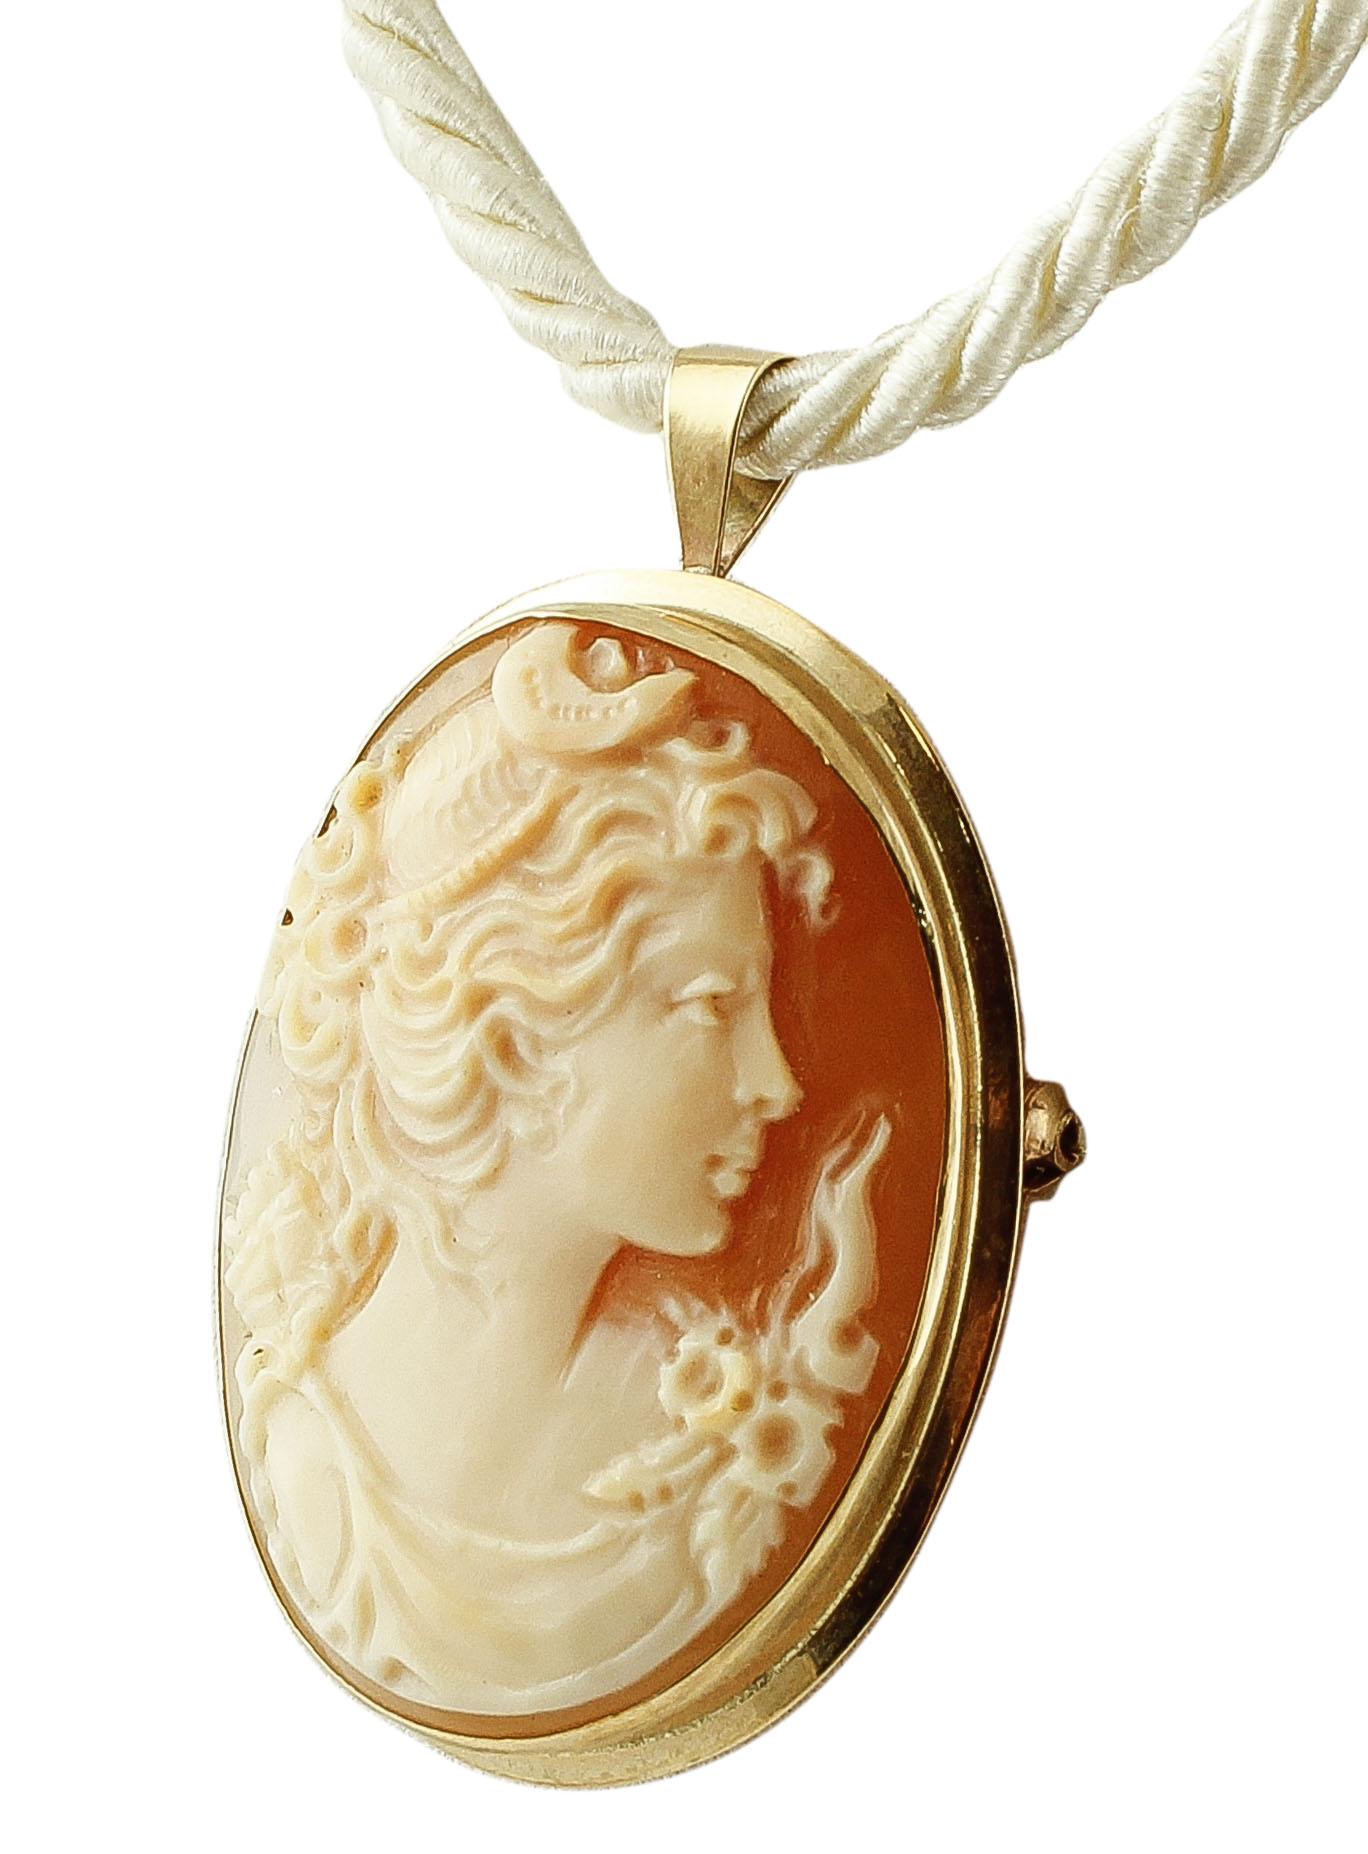 Retro cameo brooch in 9k yellow gold finely carved with lady motif. 
This brooch is realized totally handmade by Italian master goldsmtihs
Cameo 4.5 g 3.2 x 2.5 cm
RF UGU
We hereby inform our customers that, in case of return, they will not be